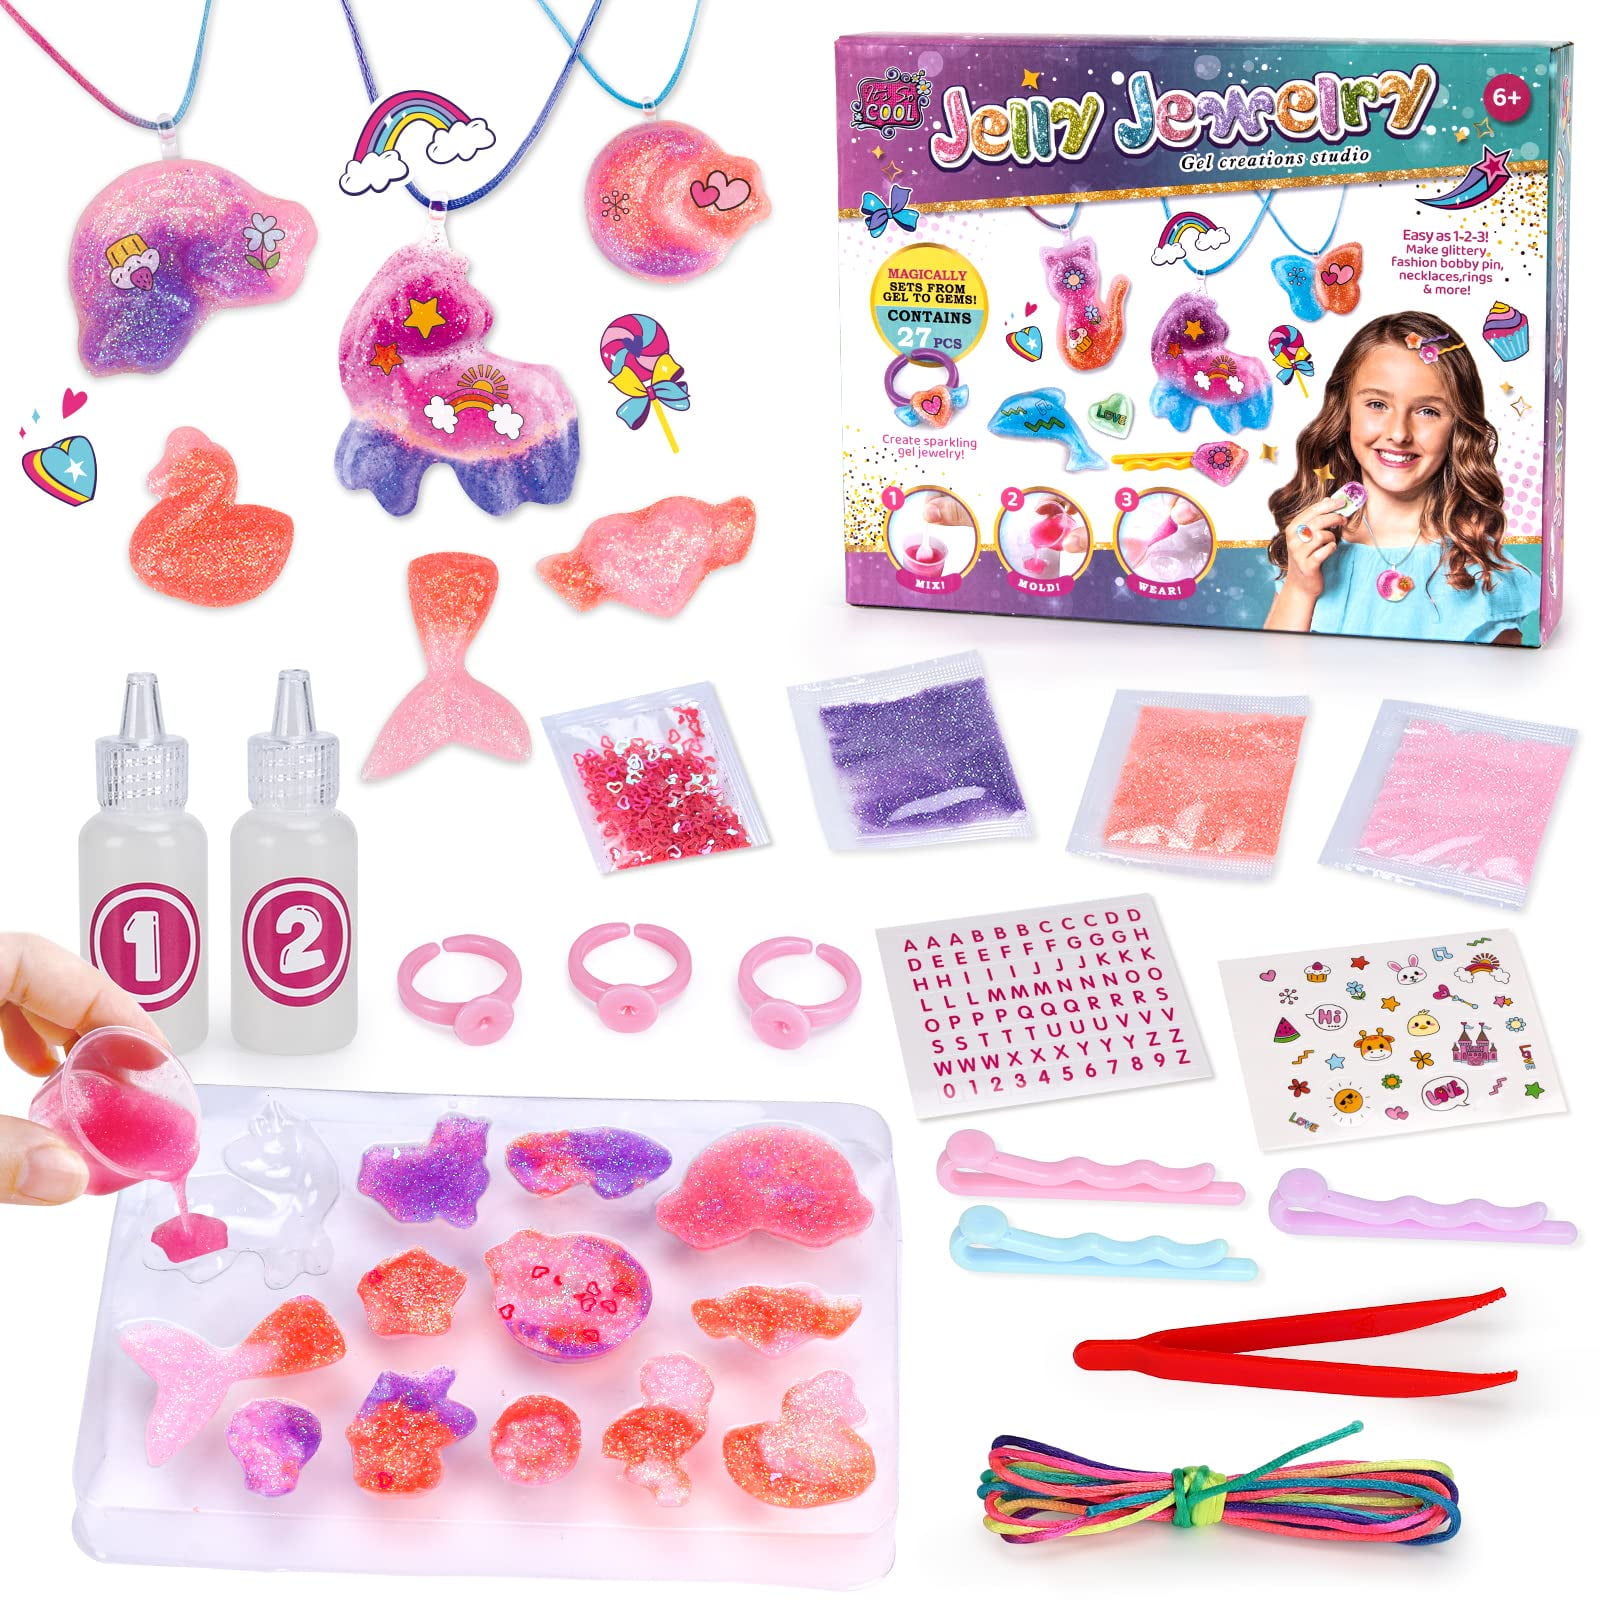 Gifts for 11 year olds girl in Toys for Kids 8 to 11 Years